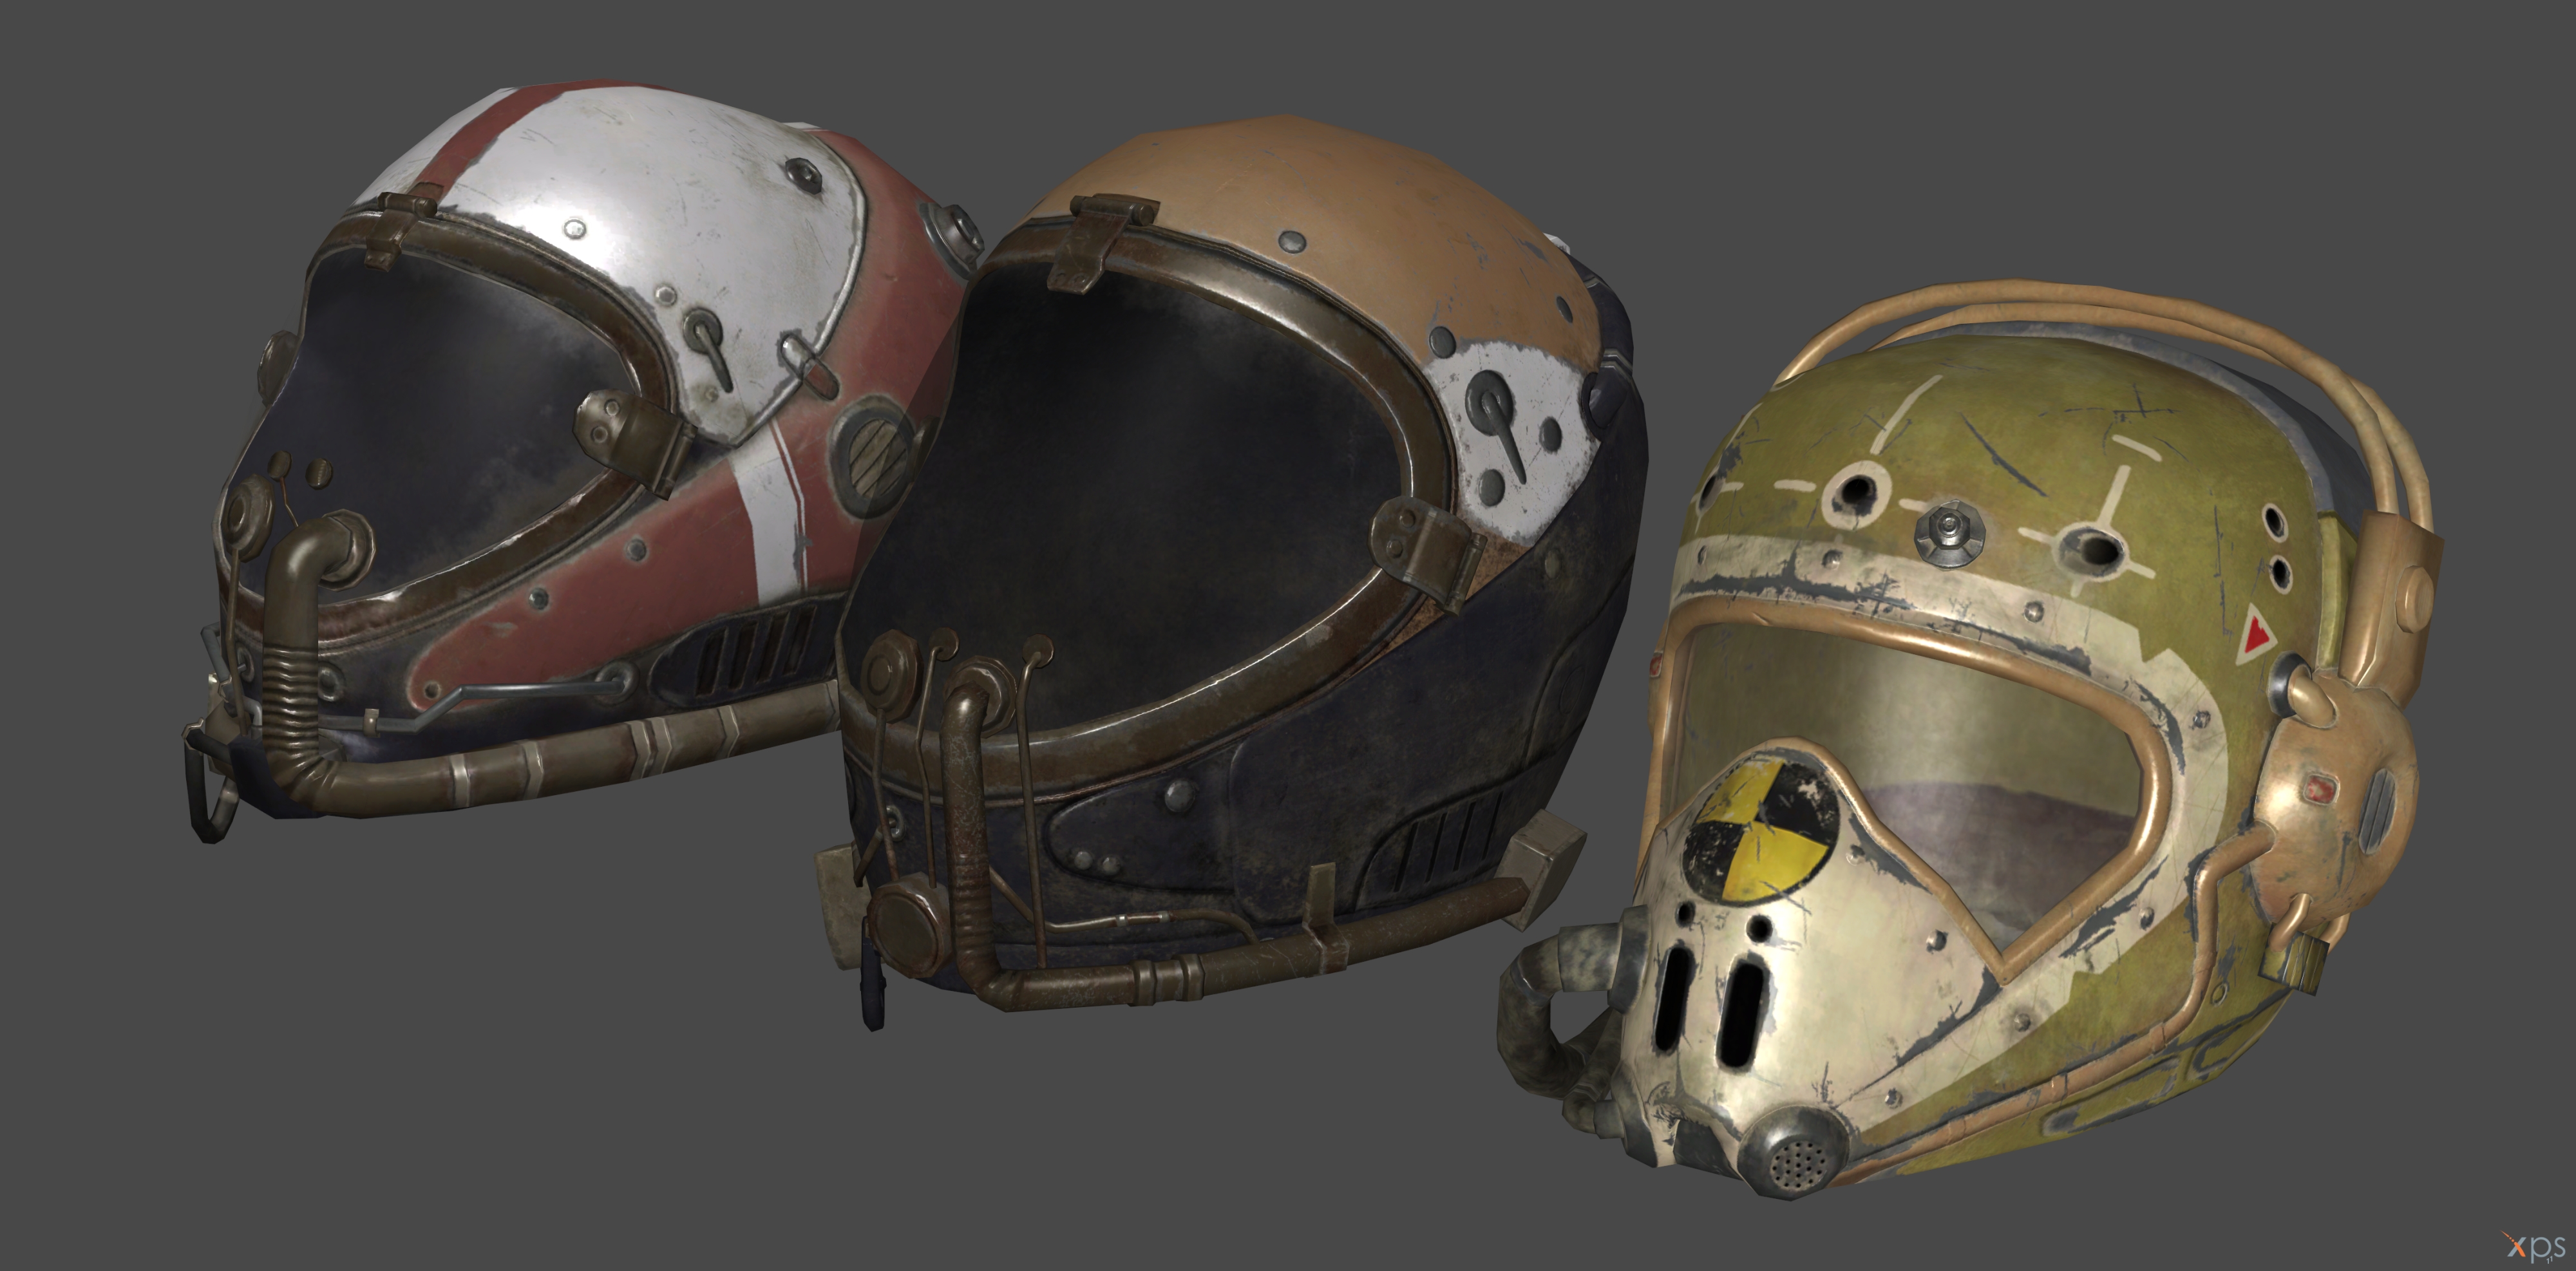 [FREE] 'Fallout 4' Helmets XPS ONLY!!! by lezisell on DeviantArt